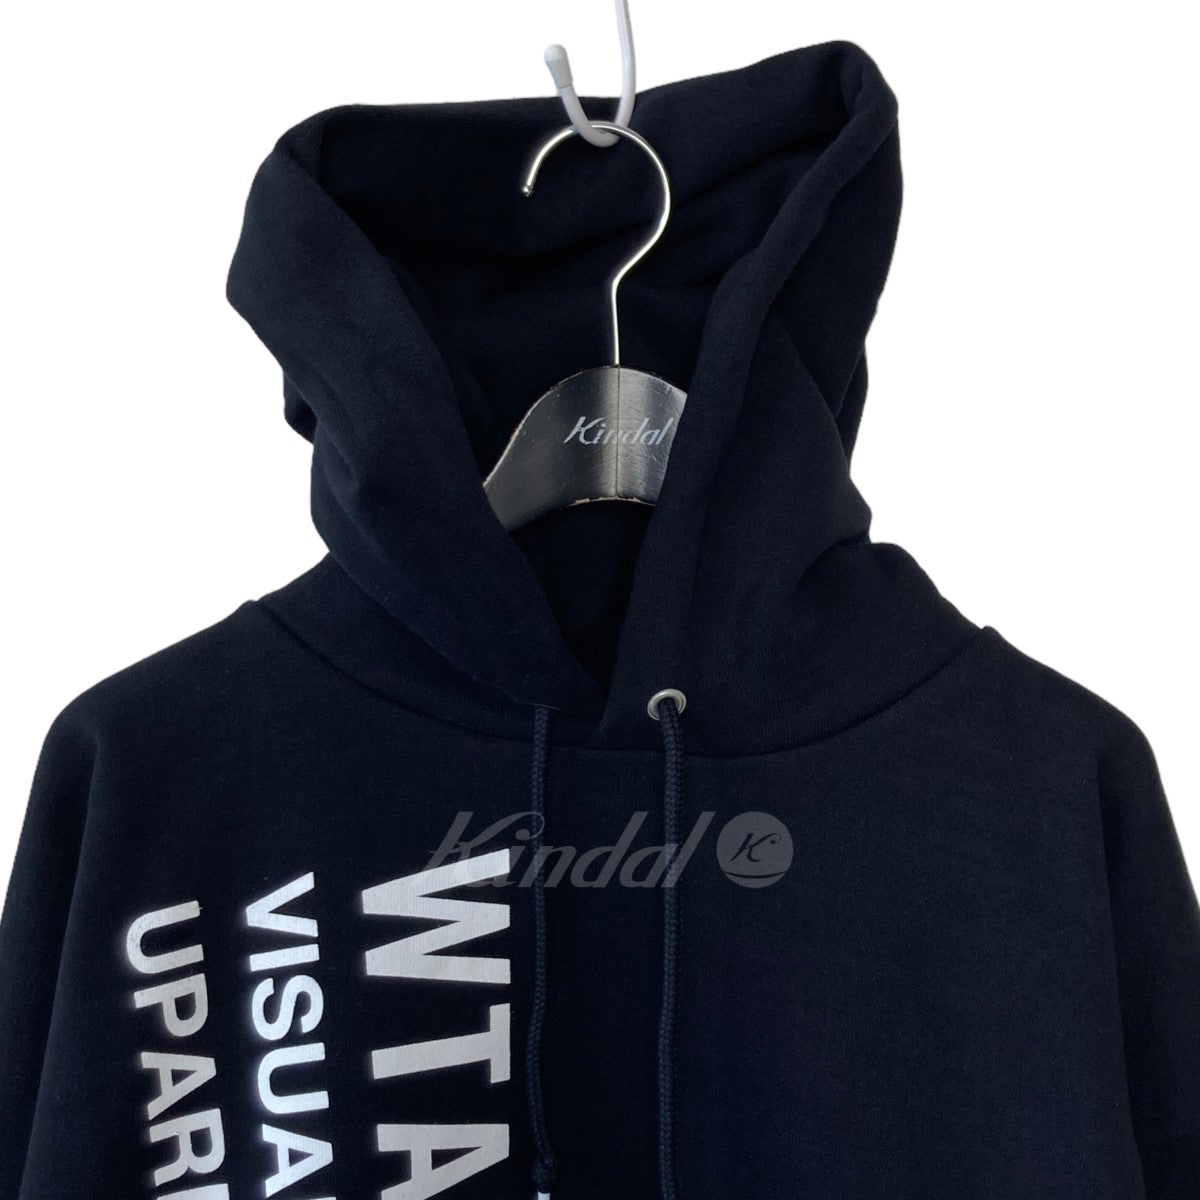 WTAPS(ダブルタップス) VISUAL UPARMORED HOODY 222ATDT-HPM02S 